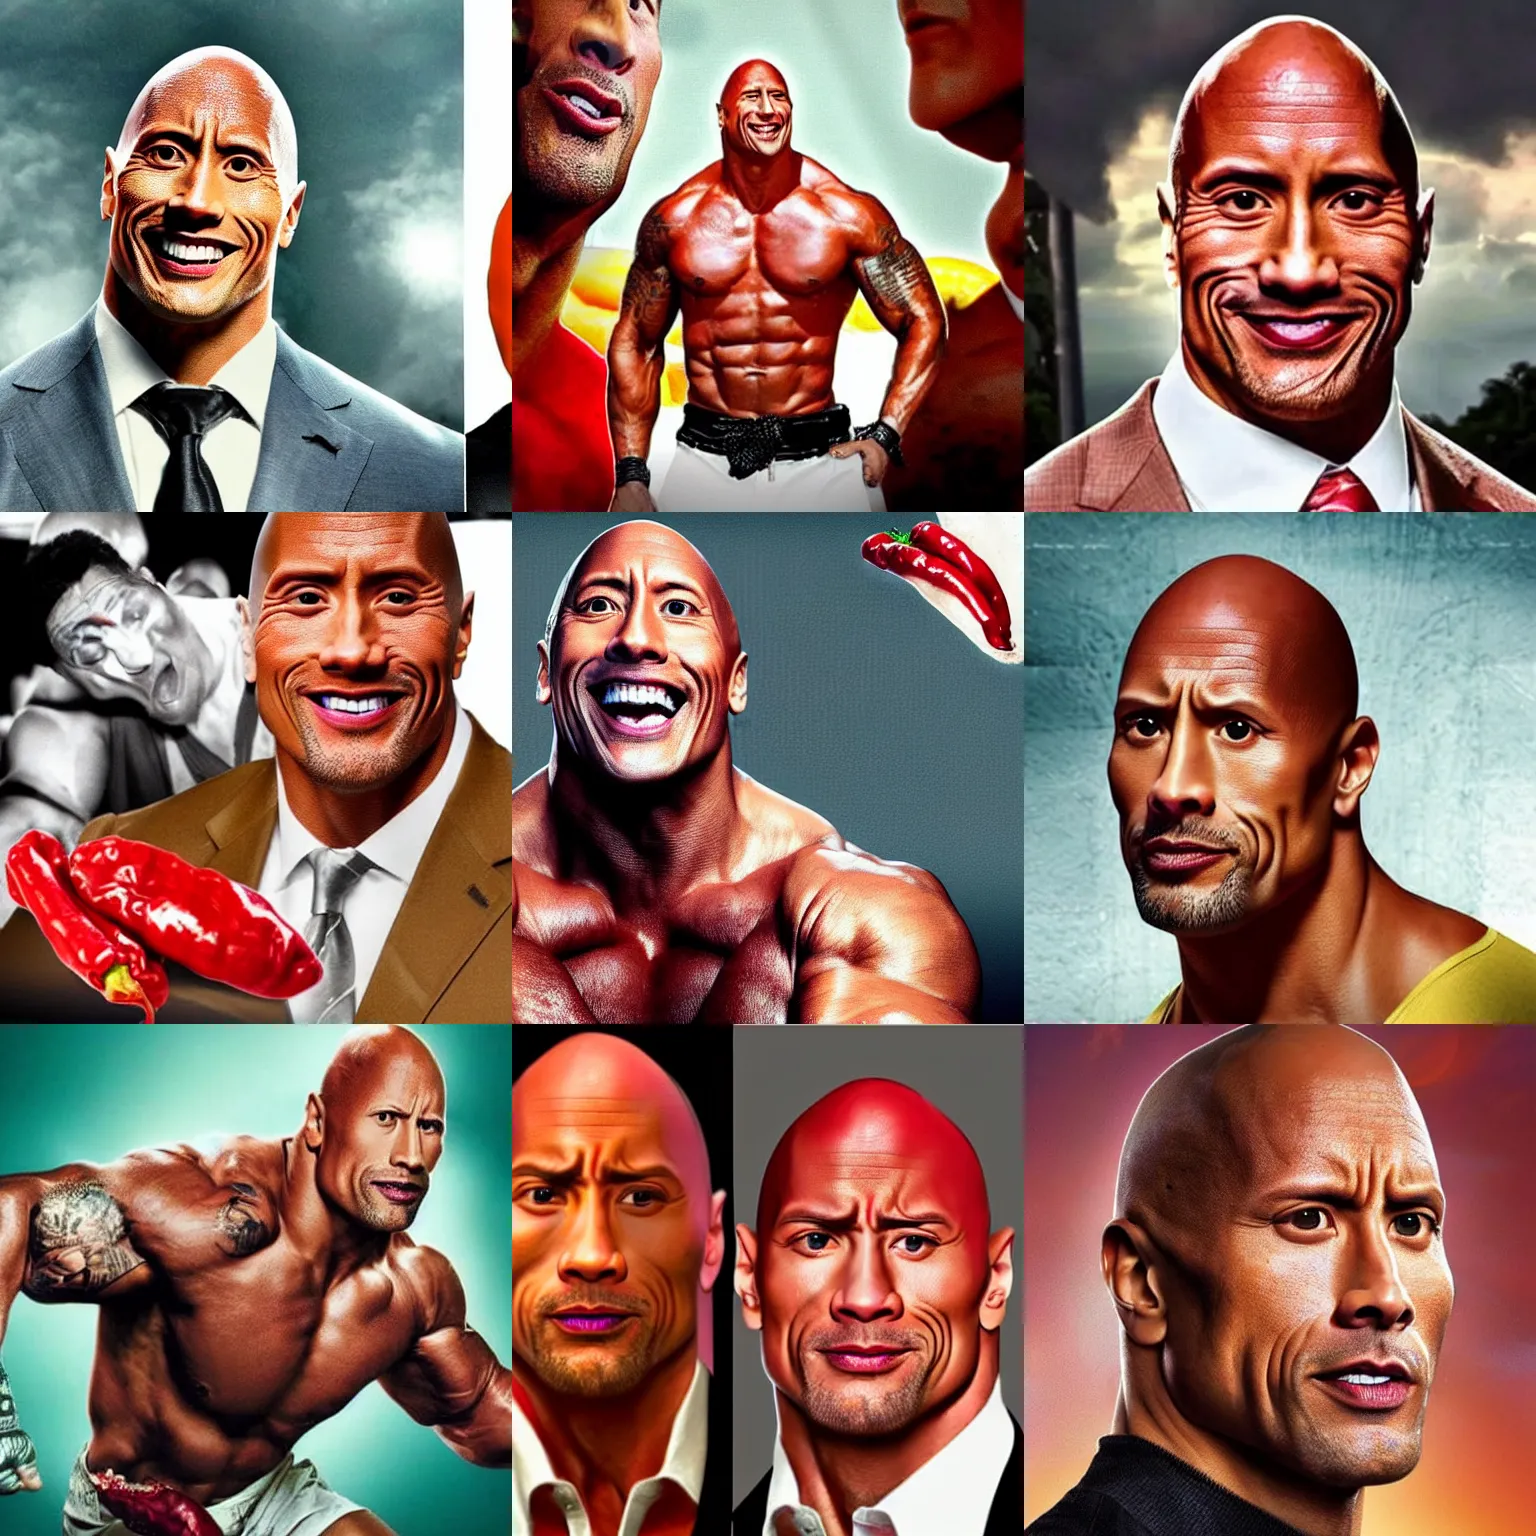 Prompt: dwayne johnson's face photoshopped poorly on a chili pepper